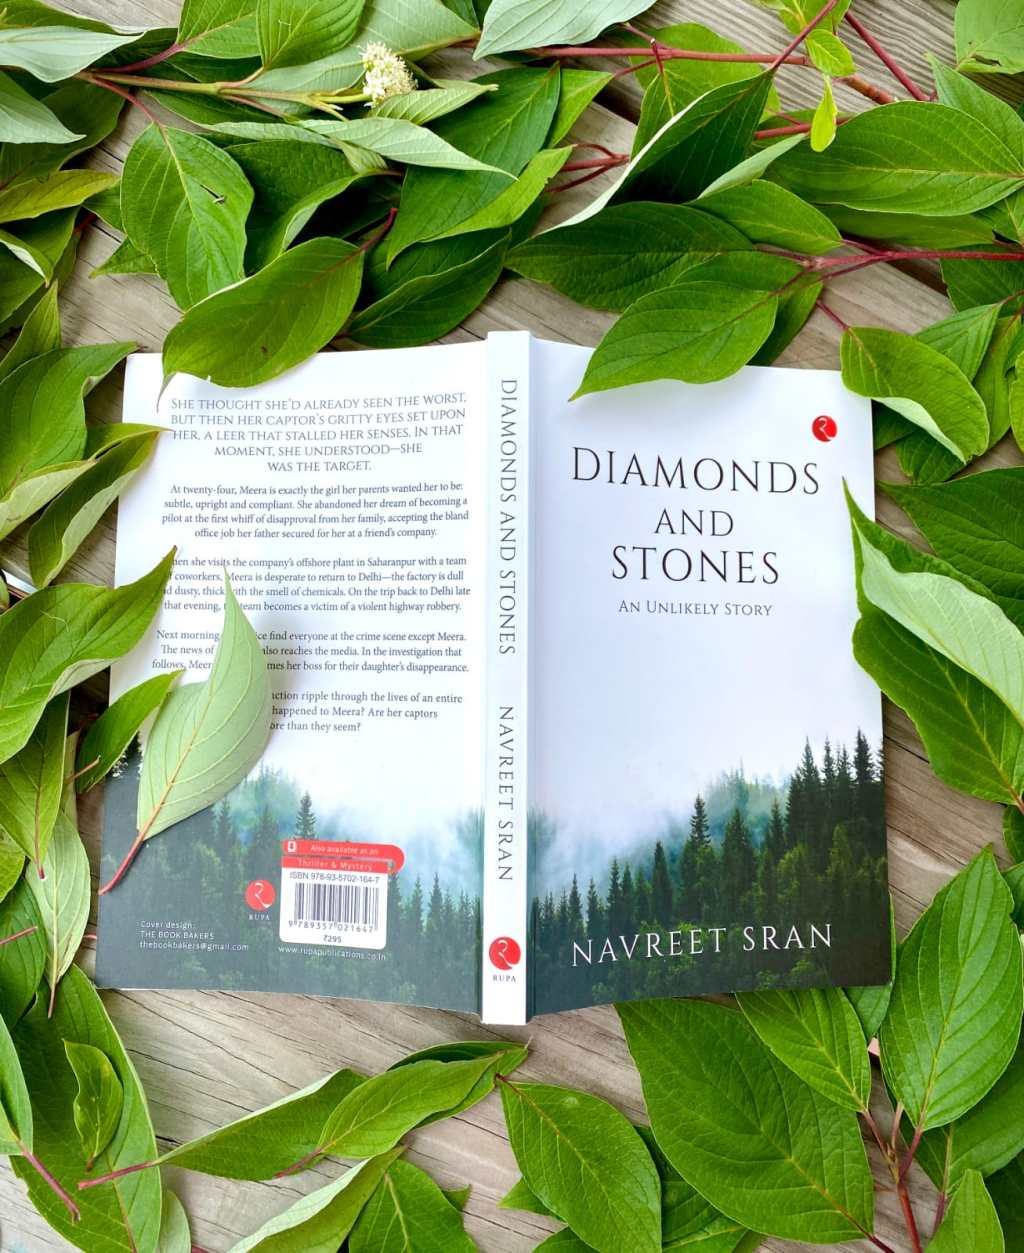 A Very Distinguished, Atmospheric Novel, Not Like Your Daily Novel: Diamonds and Stones – Book Review